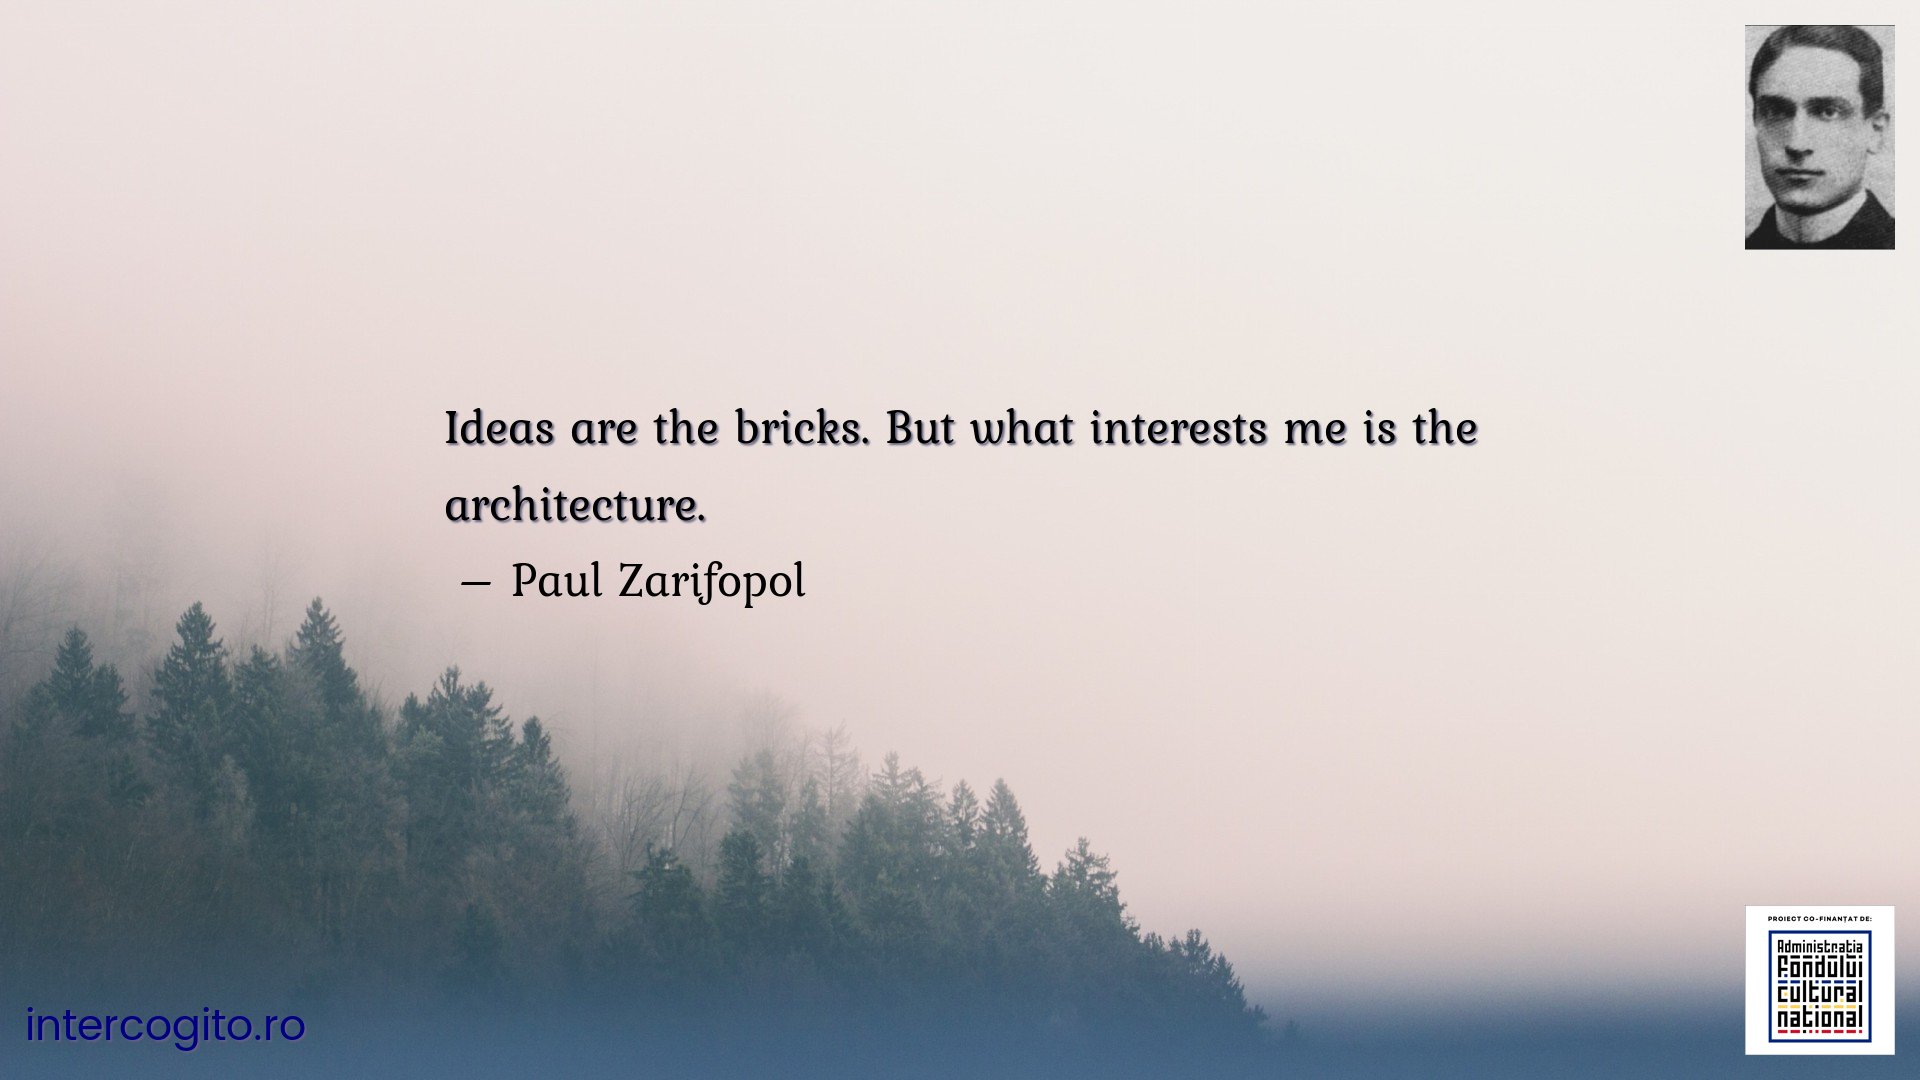 Ideas are the bricks. But what interests me is the architecture.